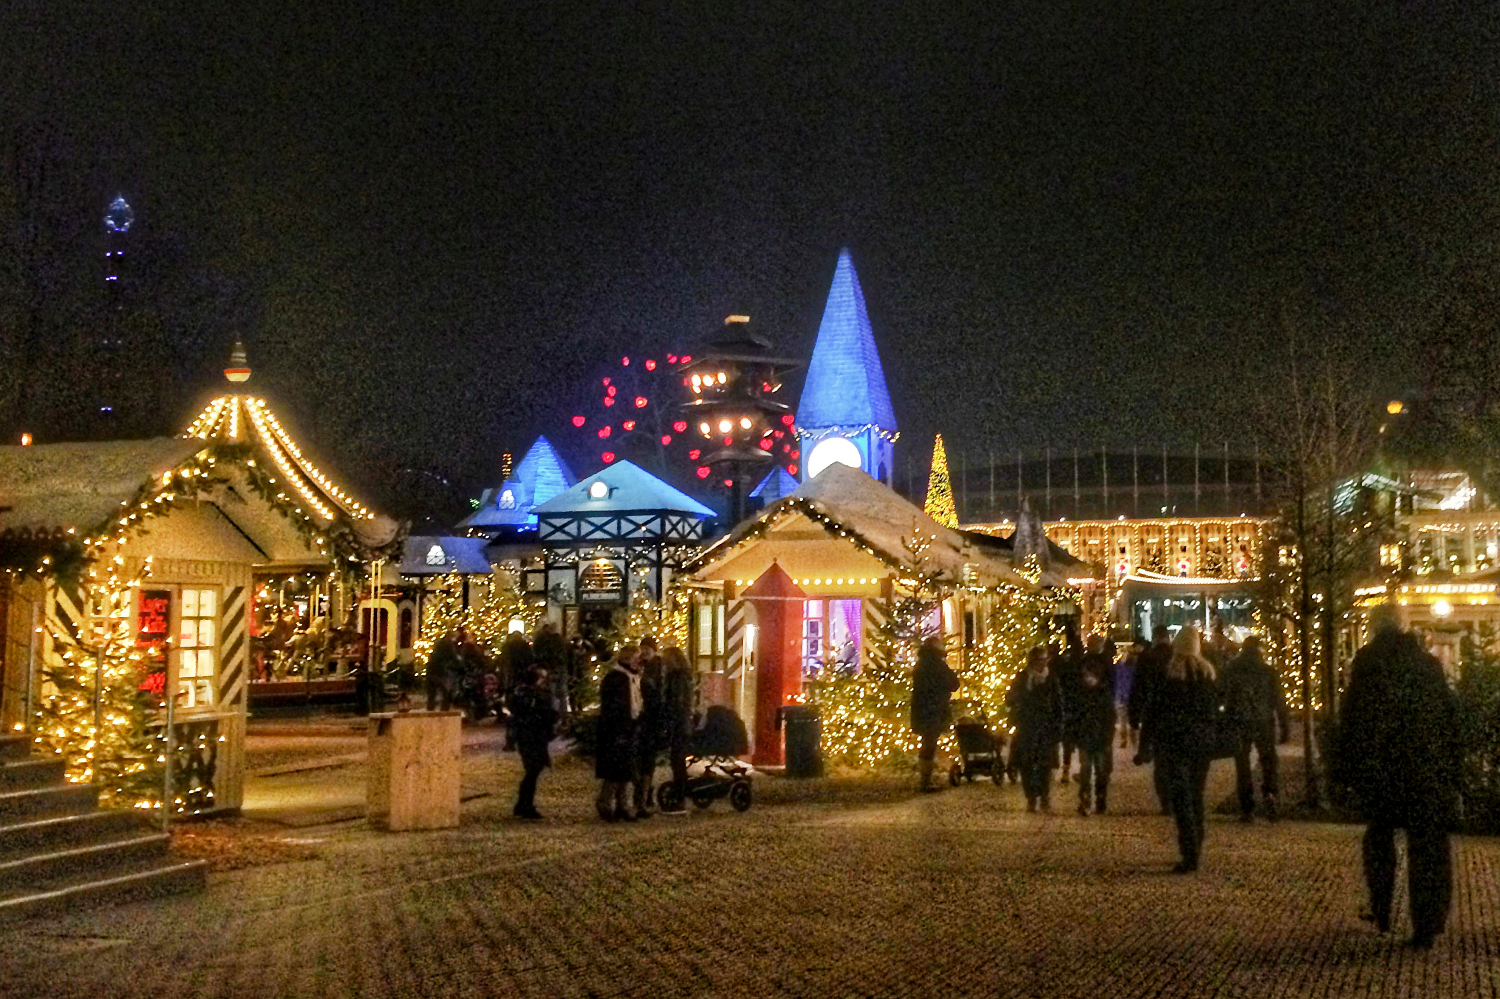 the Copenhagen Christmas Markets is one of the best Christmas Markets in Europe. Read the article and see the top Christmas markets in Europe. #christmas #christmasholidays #christmastrips #europemarkets #europechristmasmarkets #christmasmarkets 